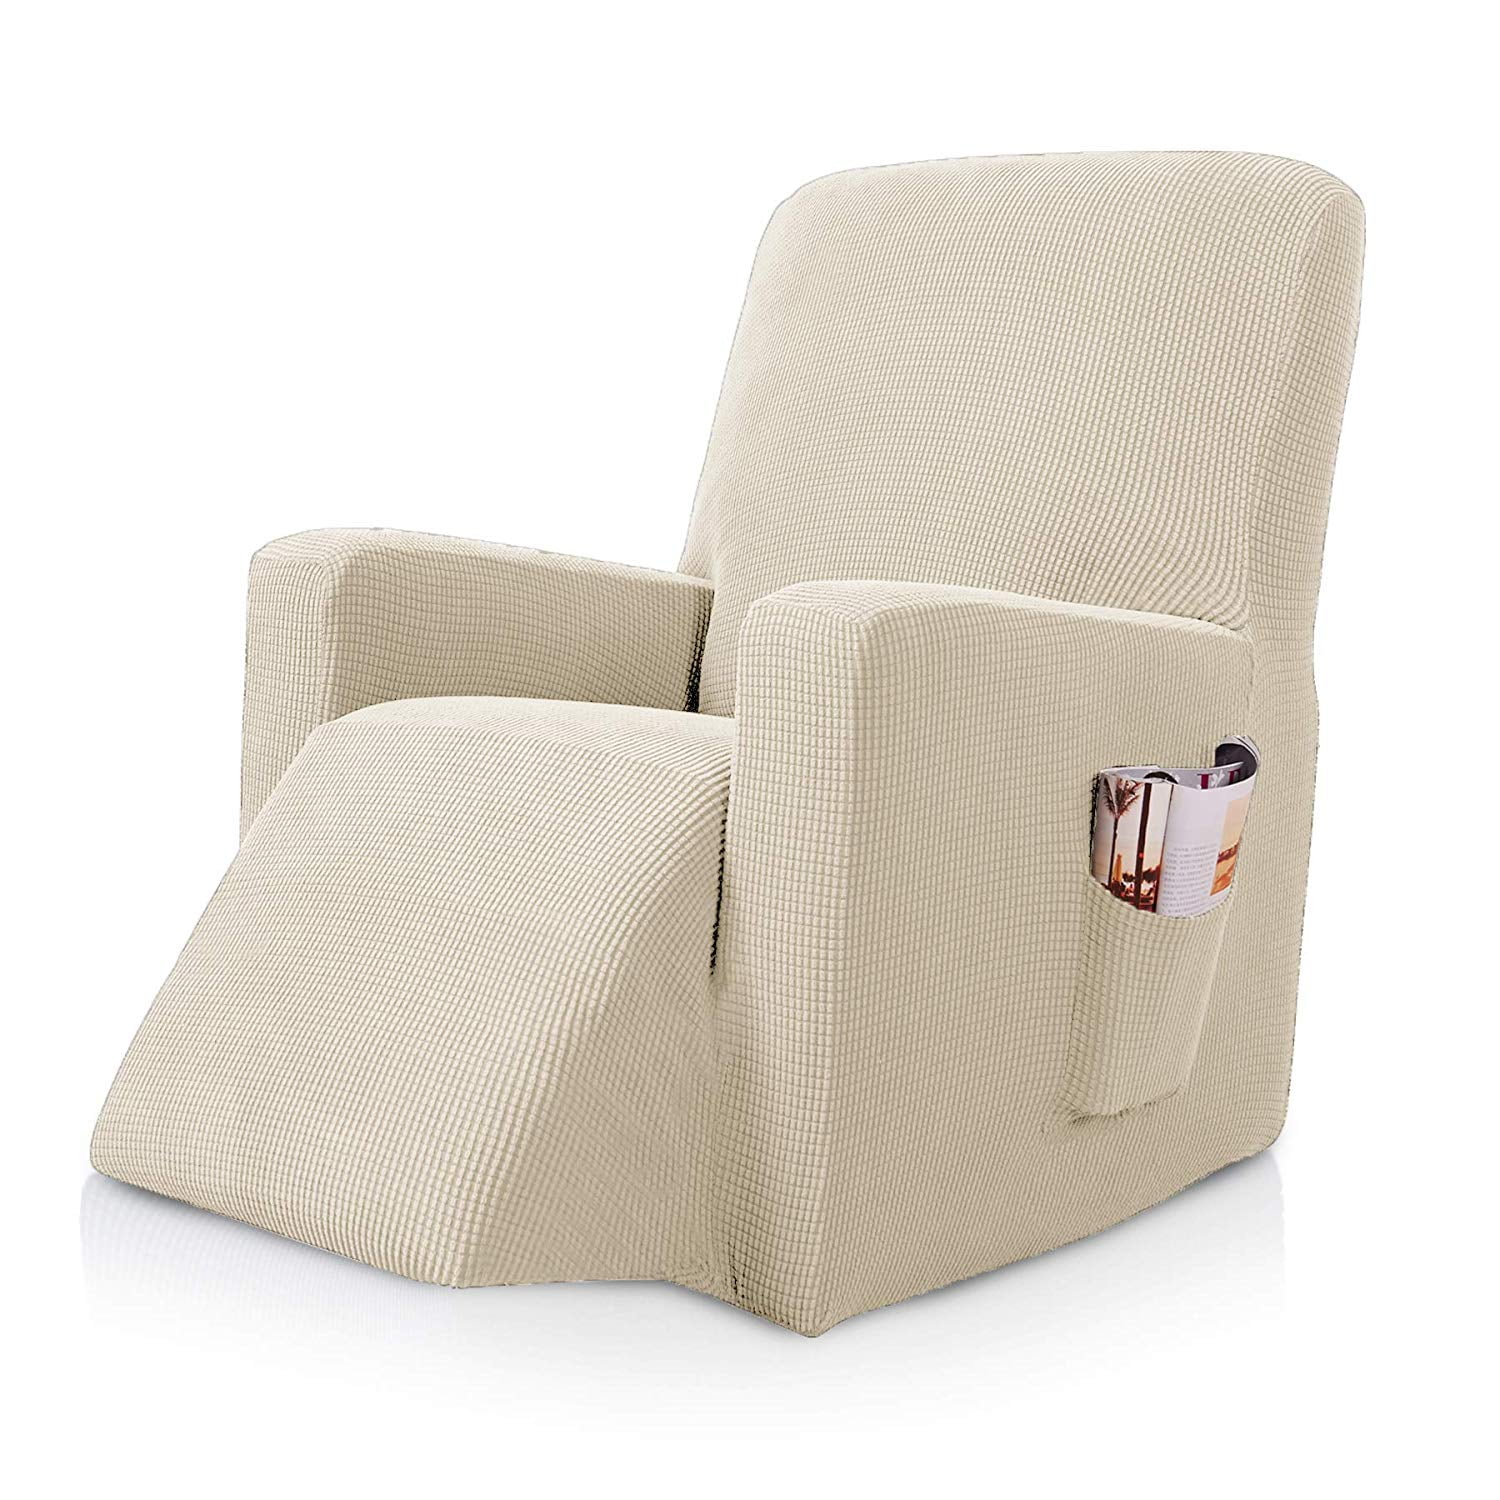 Brown, Recliner subrtex Stretch Chair Slipcover Furniture Protector Lazy Boy Covers for Leather and Fabric Sofa with Side Pocket